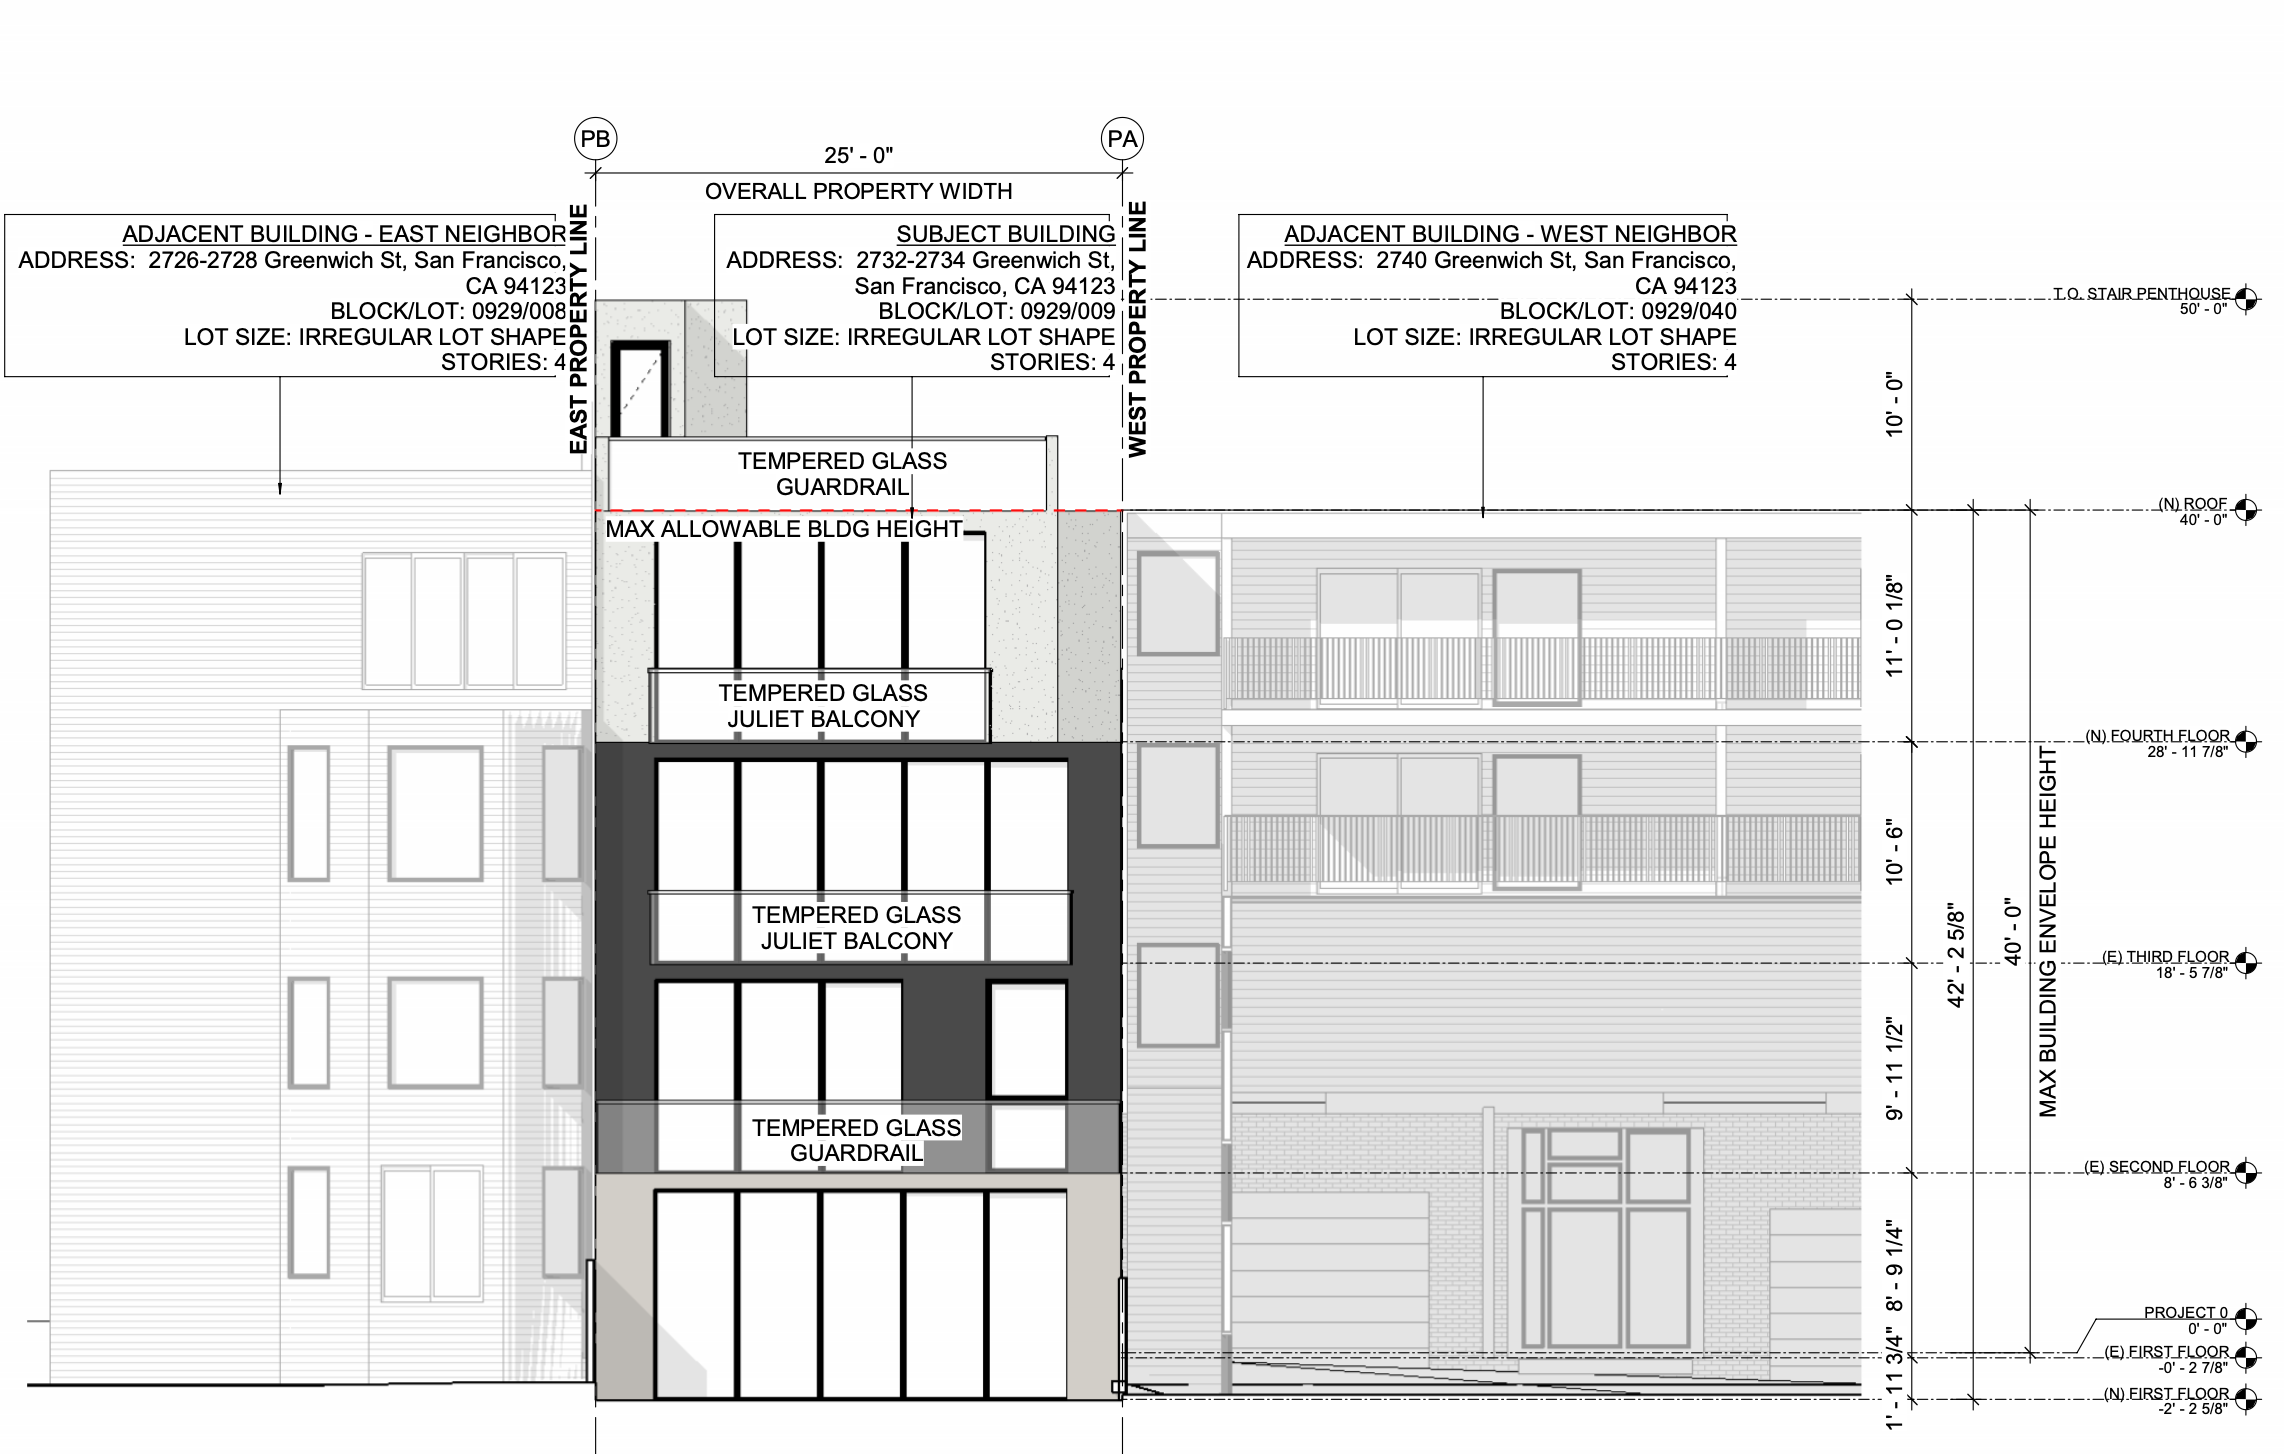 2732 Greenwich Street Proposed South Elevation